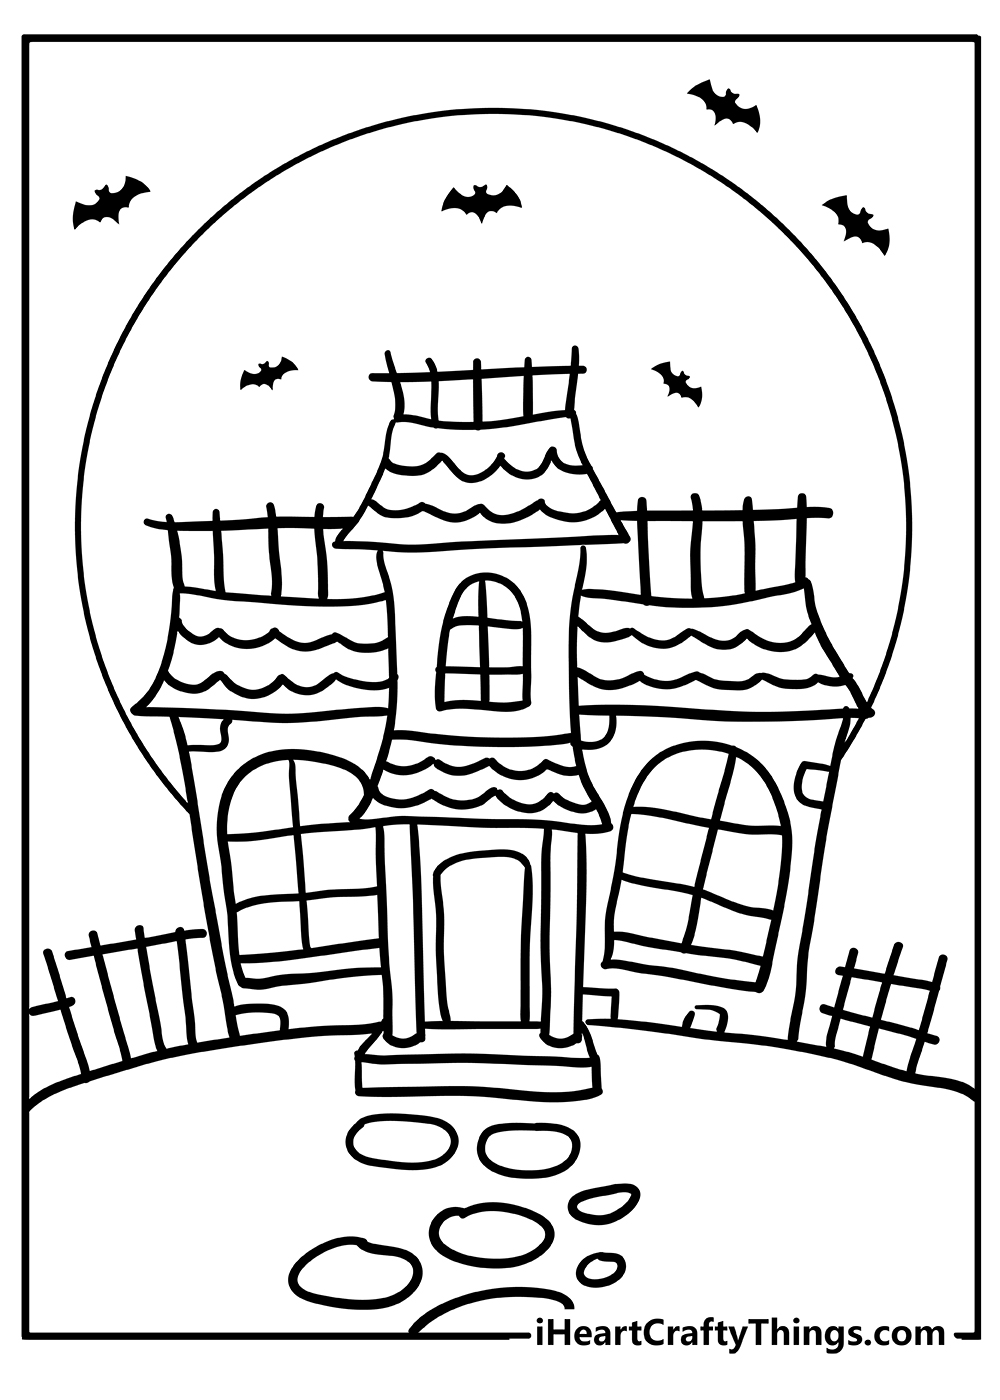 Haunted House Coloring Original Sheet for children free download